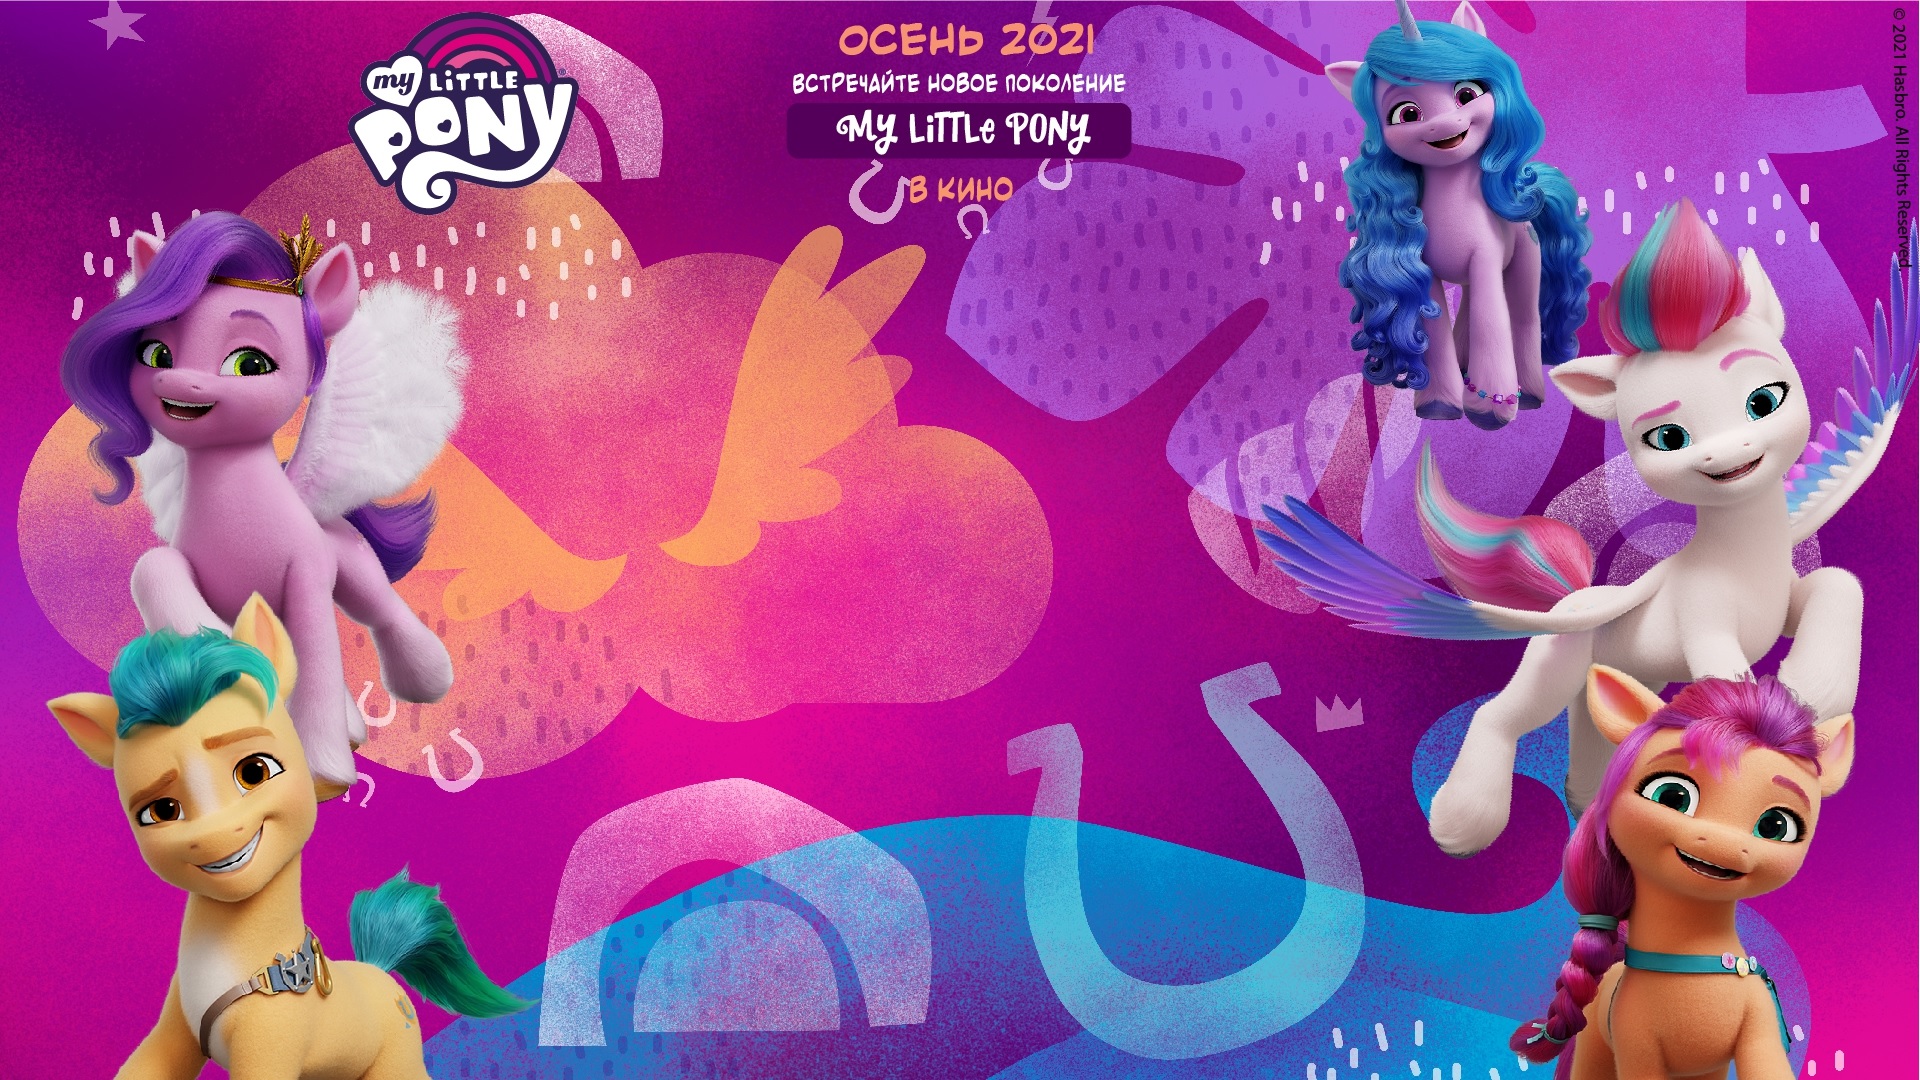 New My Little Pony New Image 5 Generation Image With All Characters